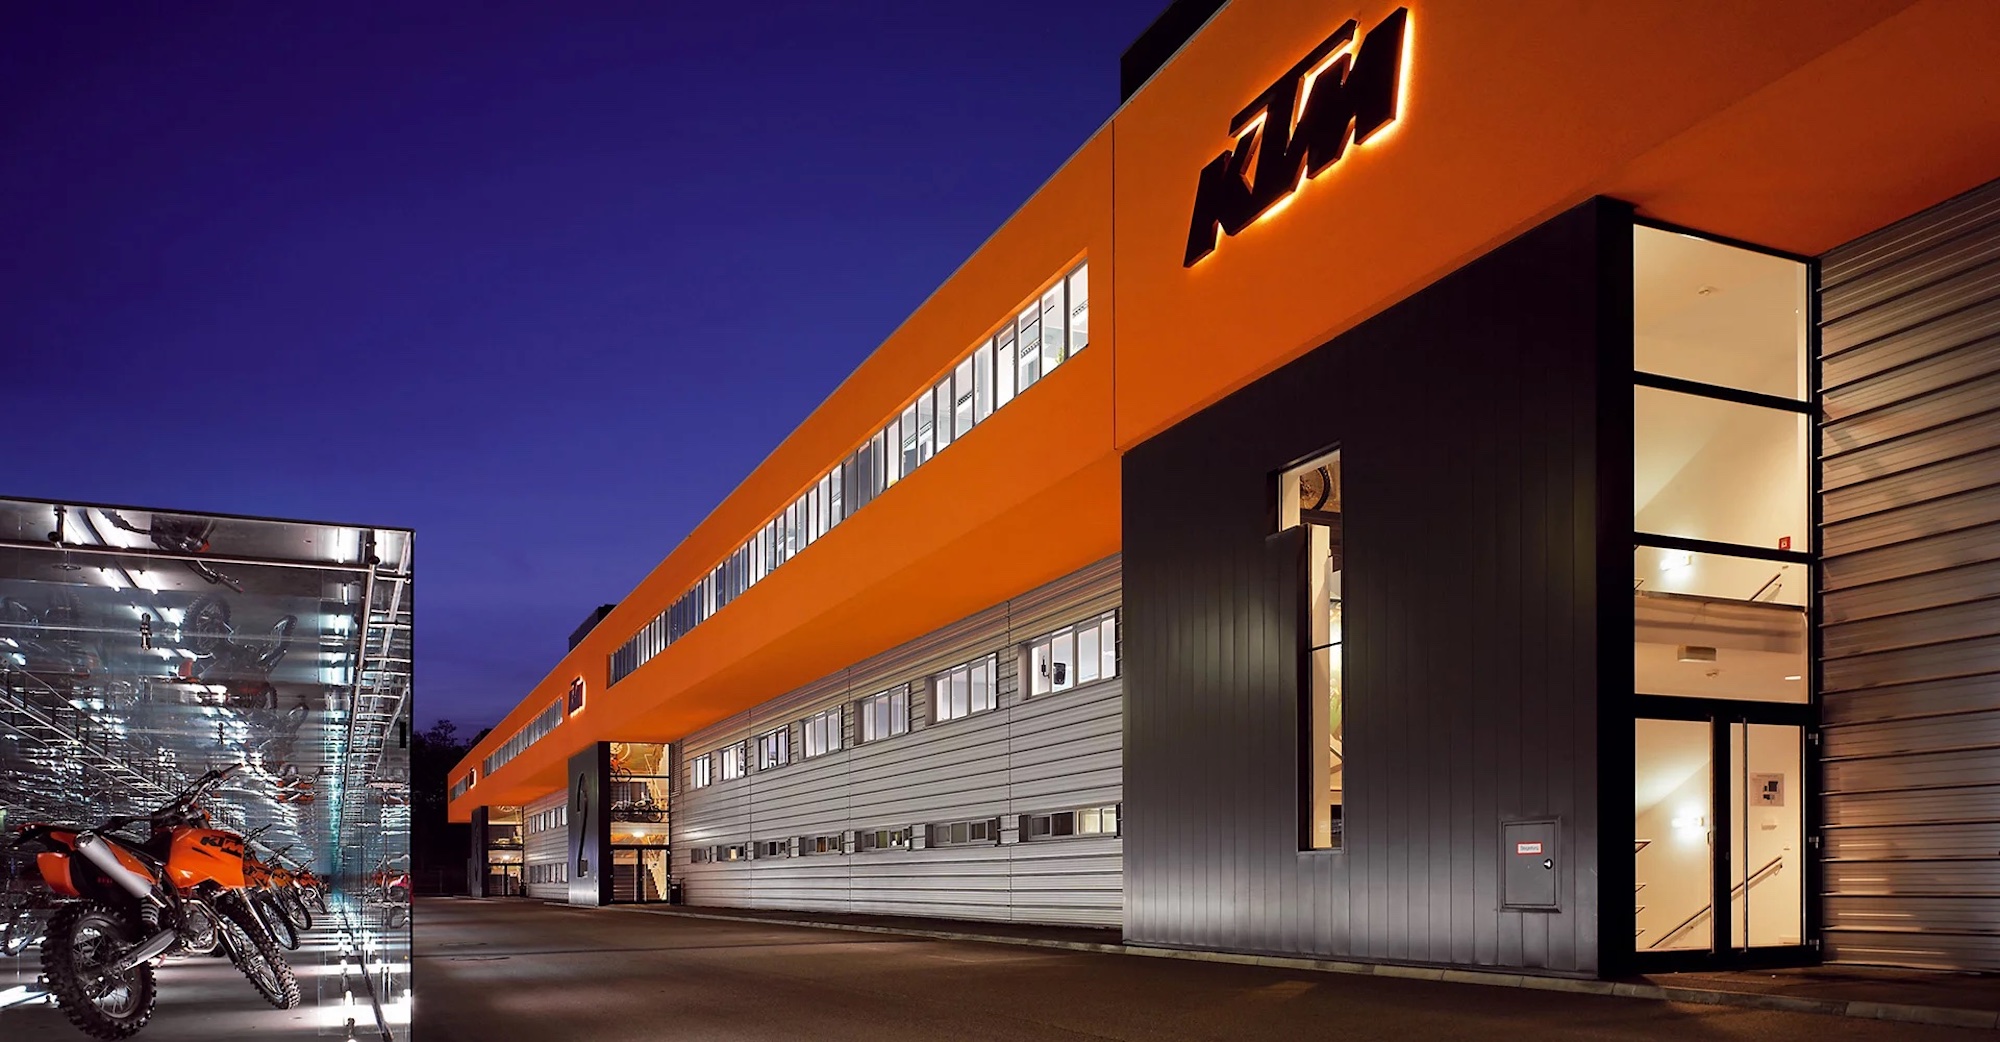 KTM AG's headquarters. Media sourced from KTM AG.